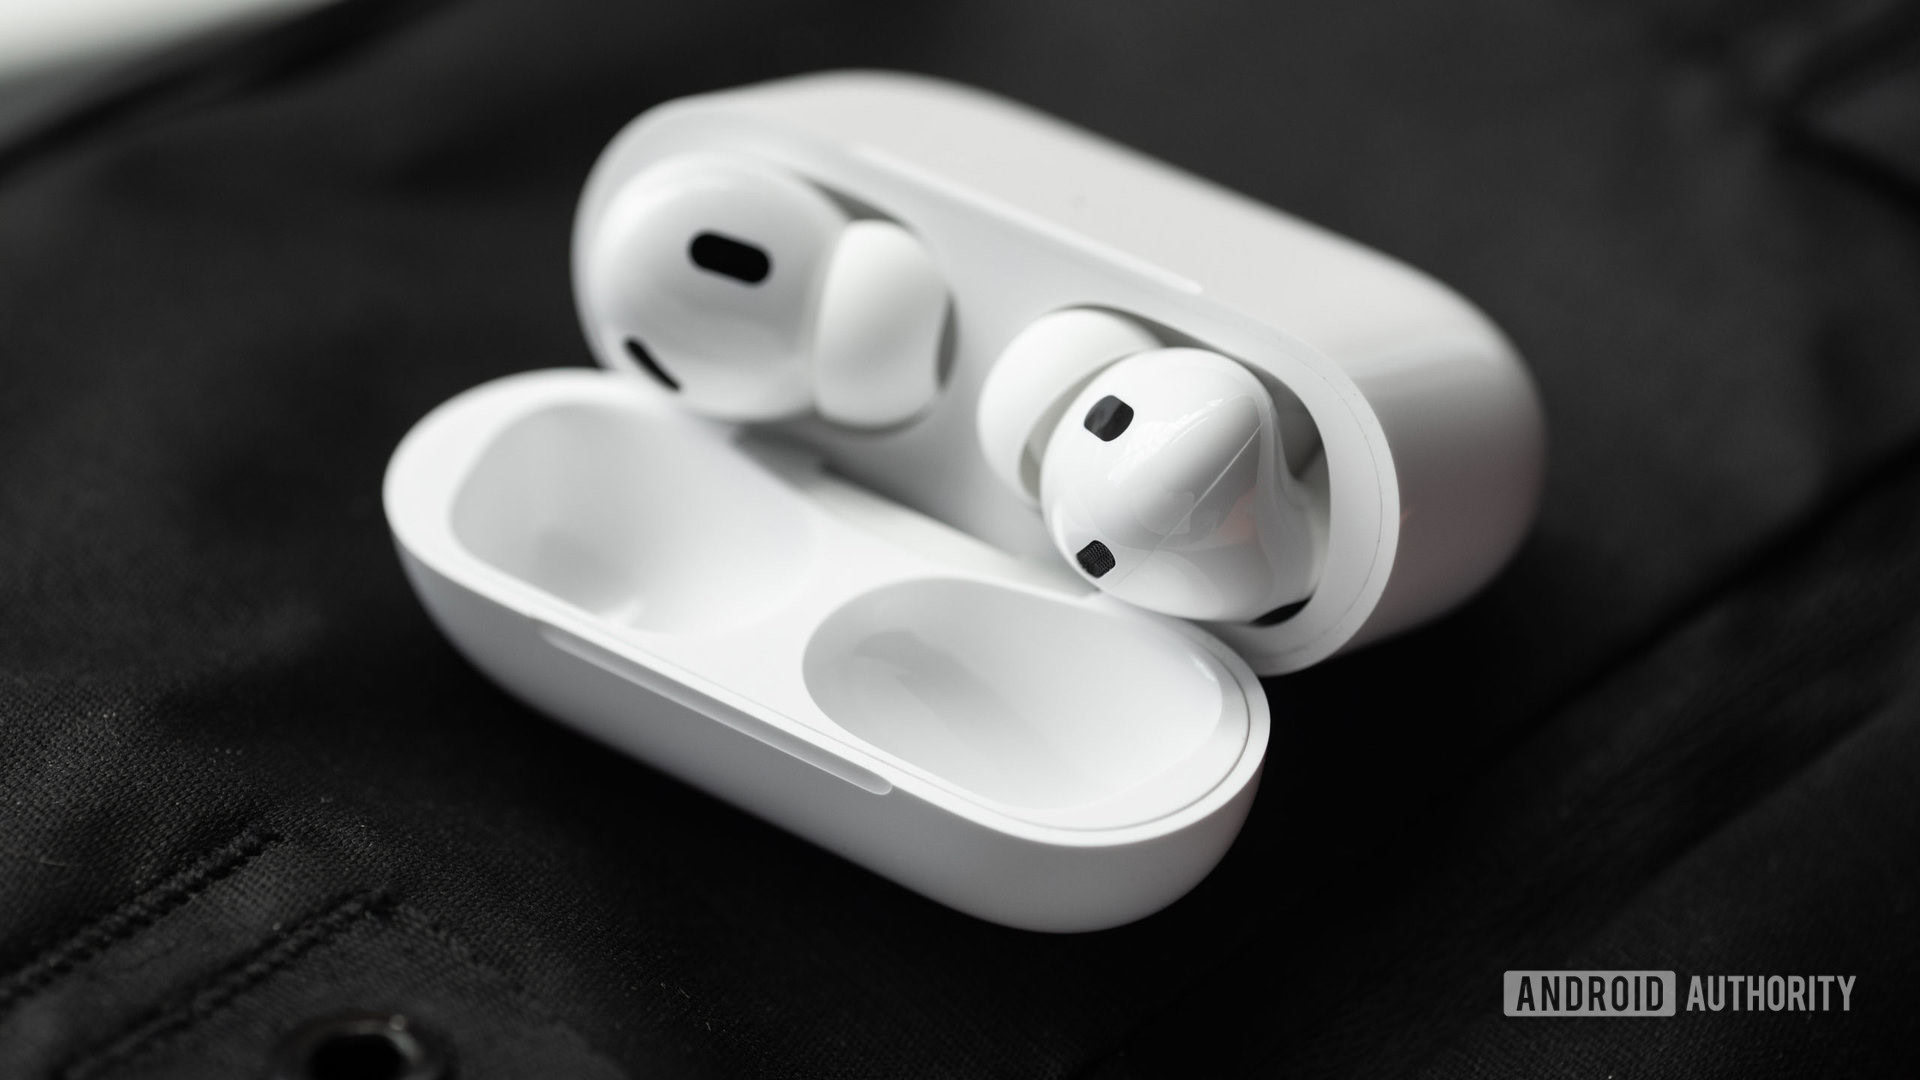 Apple AirPods Pro (2nd generation) review: The best buds for iPhone